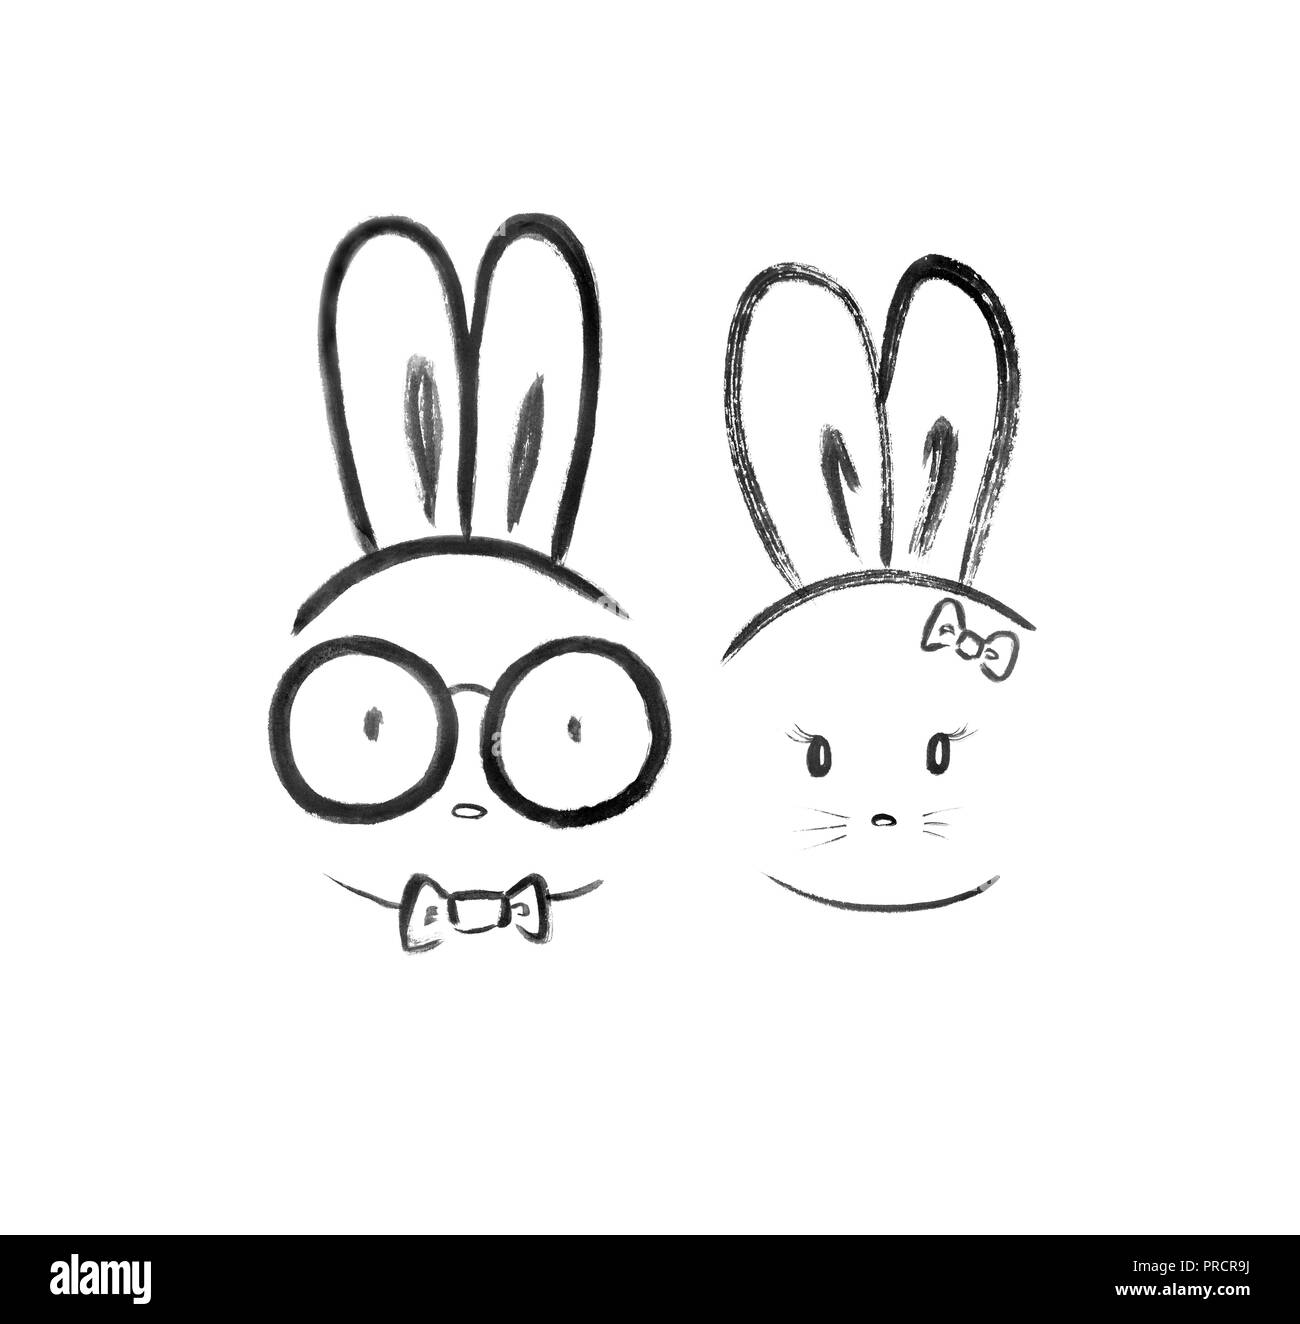 Cute kawaii couple of a bunny nerd boyfriend in spectacles and a bunny girlfriend with a bow. Minimalistic black and white oriental style illustration Stock Photo